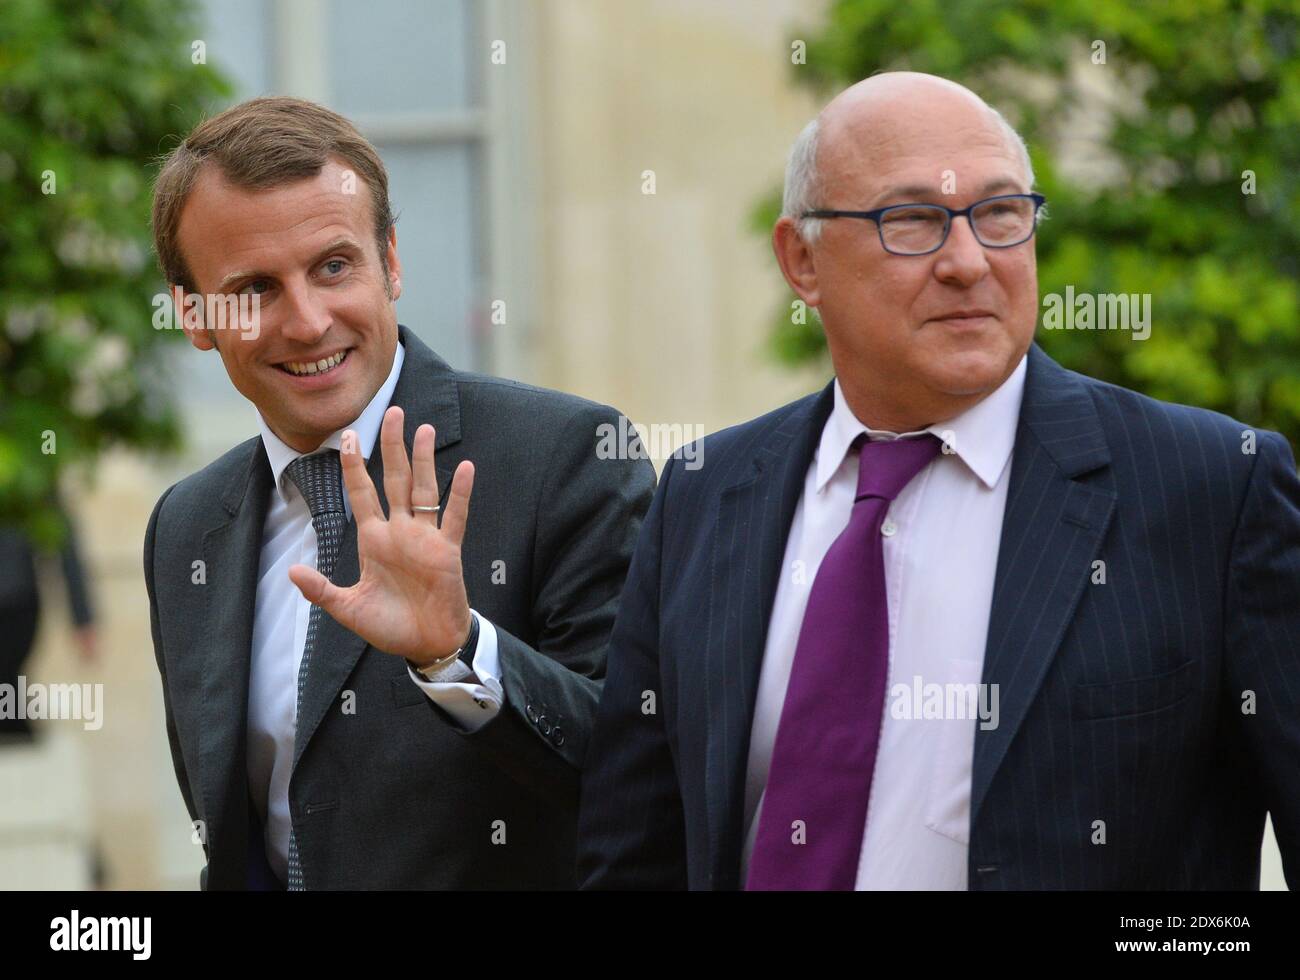 French Finance Minister Michel Sapin and newly-appointed Economy Minister Emmanuel Macron arriving at the Elysee presidential palace in Paris, France before a weekly cabinet meeting. French President Francois Hollande on August 27 installed a former banker and ally as economy minister in an emergency reshuffle seen as the 'last chance' to haul France out of the biggest crisis of his presidency. Hollande caught everyone off guard with the appointment of Emmanuel Macron, a 36-year-old ex-Rothschild banker and architect of the president's economic policy. Photo by Christian Liewig/ABACAPRESS.COM Stock Photo